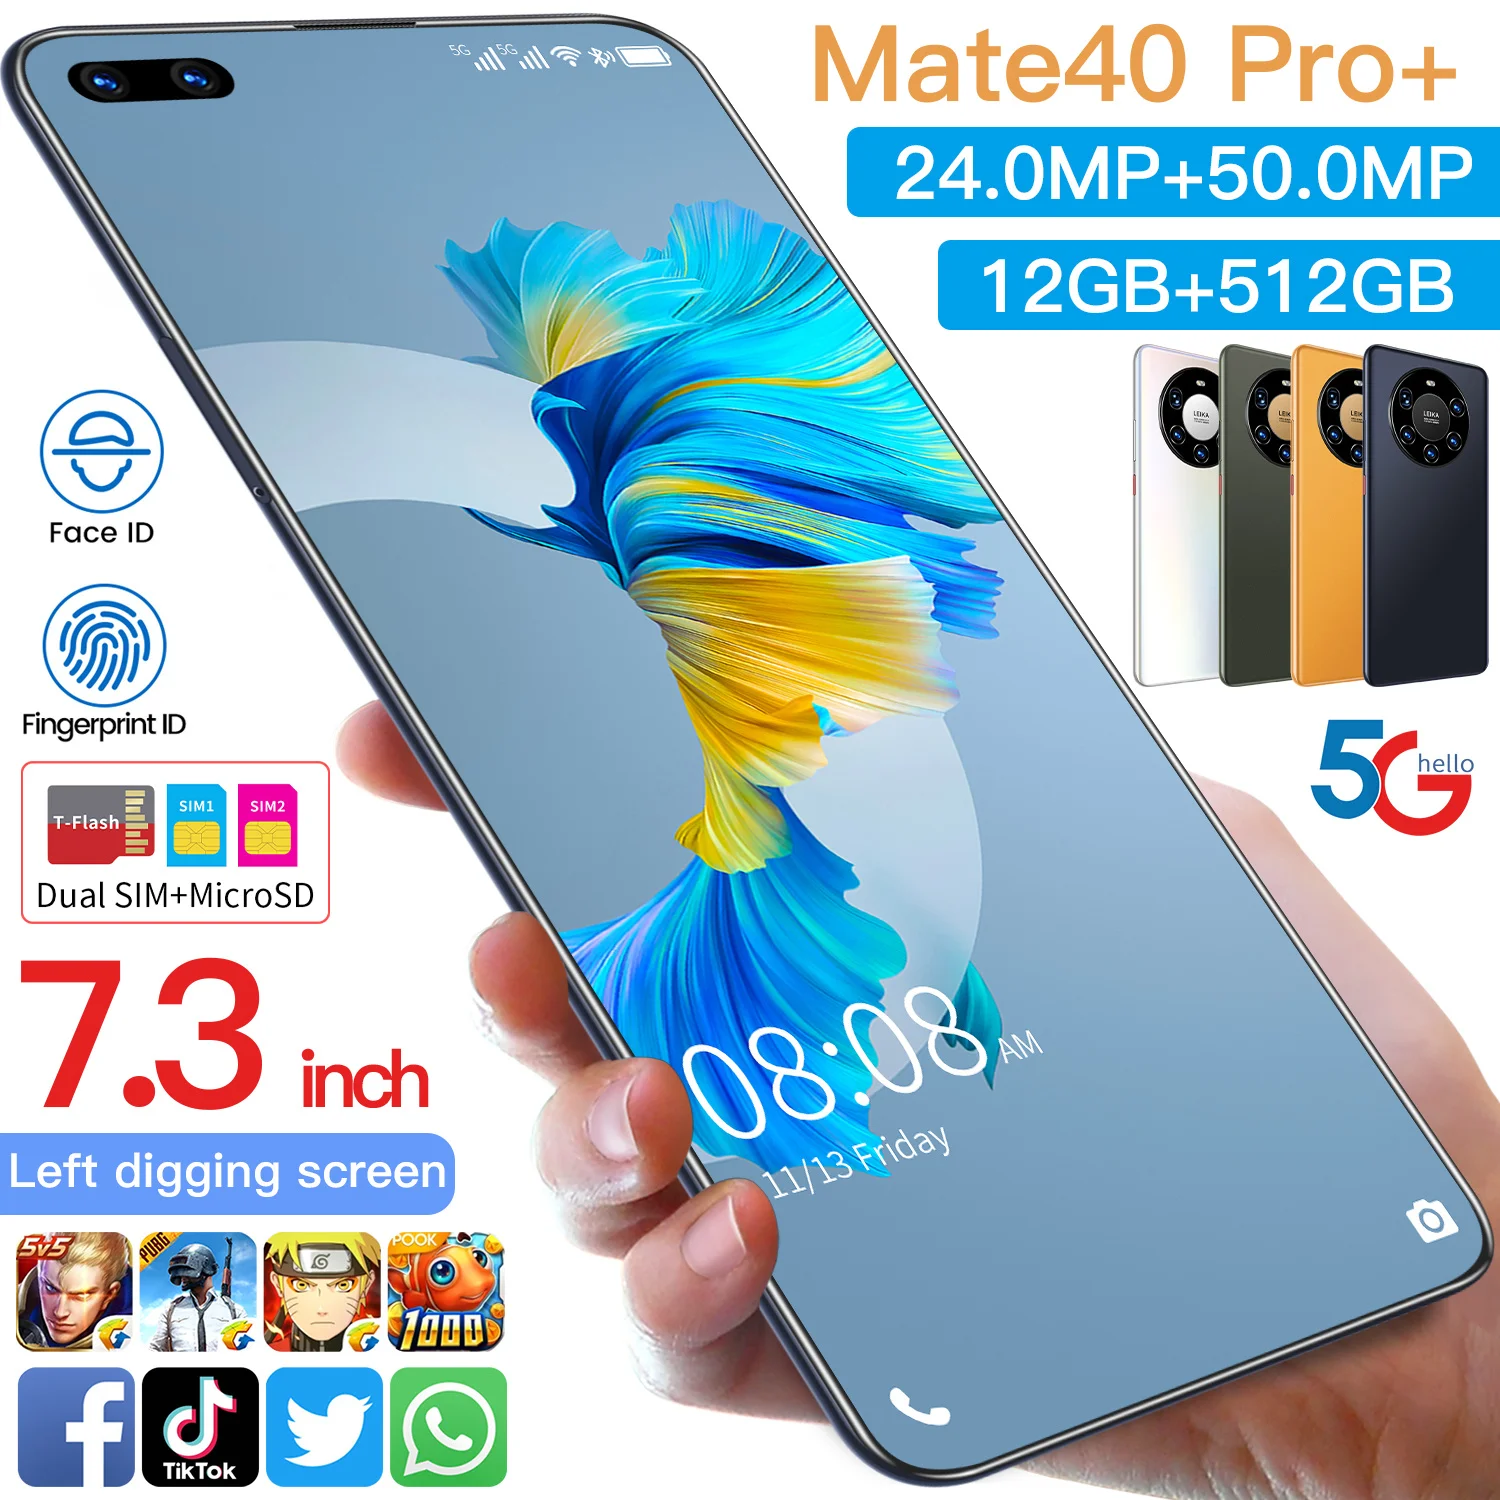 

MATE40 PRO+ 7.3 inch 24MP+50MP 12GB+512GB 10 Core 5G Smart Cell Phones Large Capacity Battery Mobile Android Smartphone, Black rose gold blue green